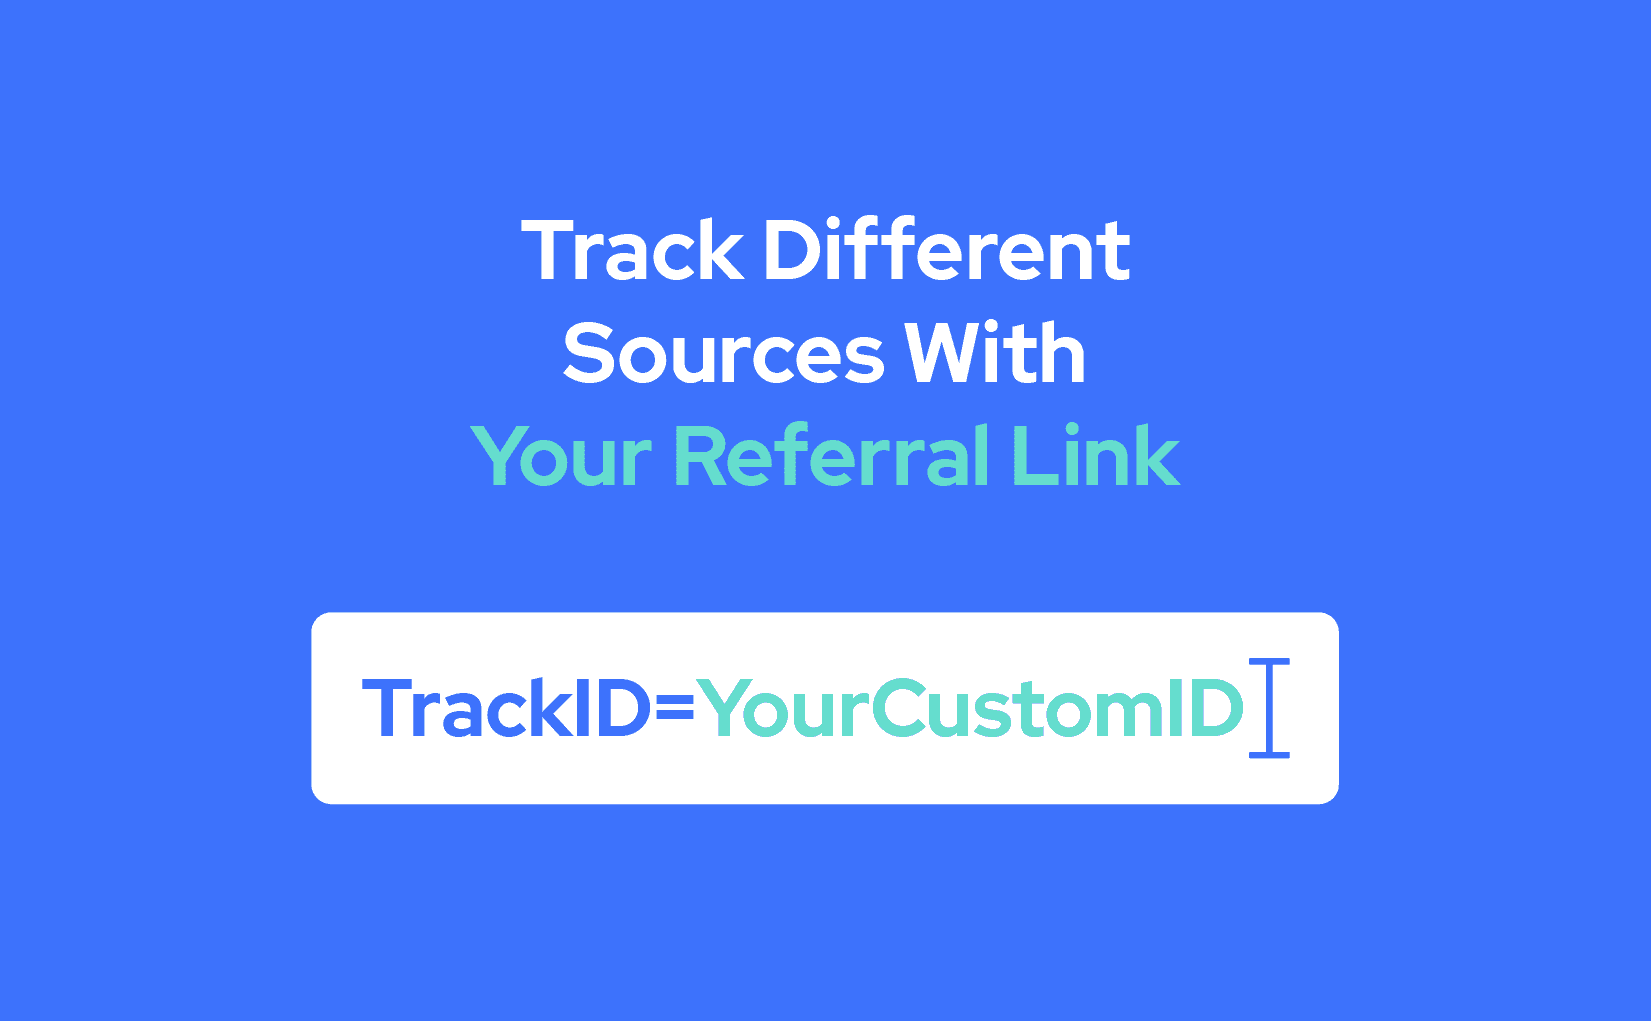 In this blog post, we explain how to track different sources with customized referral link.